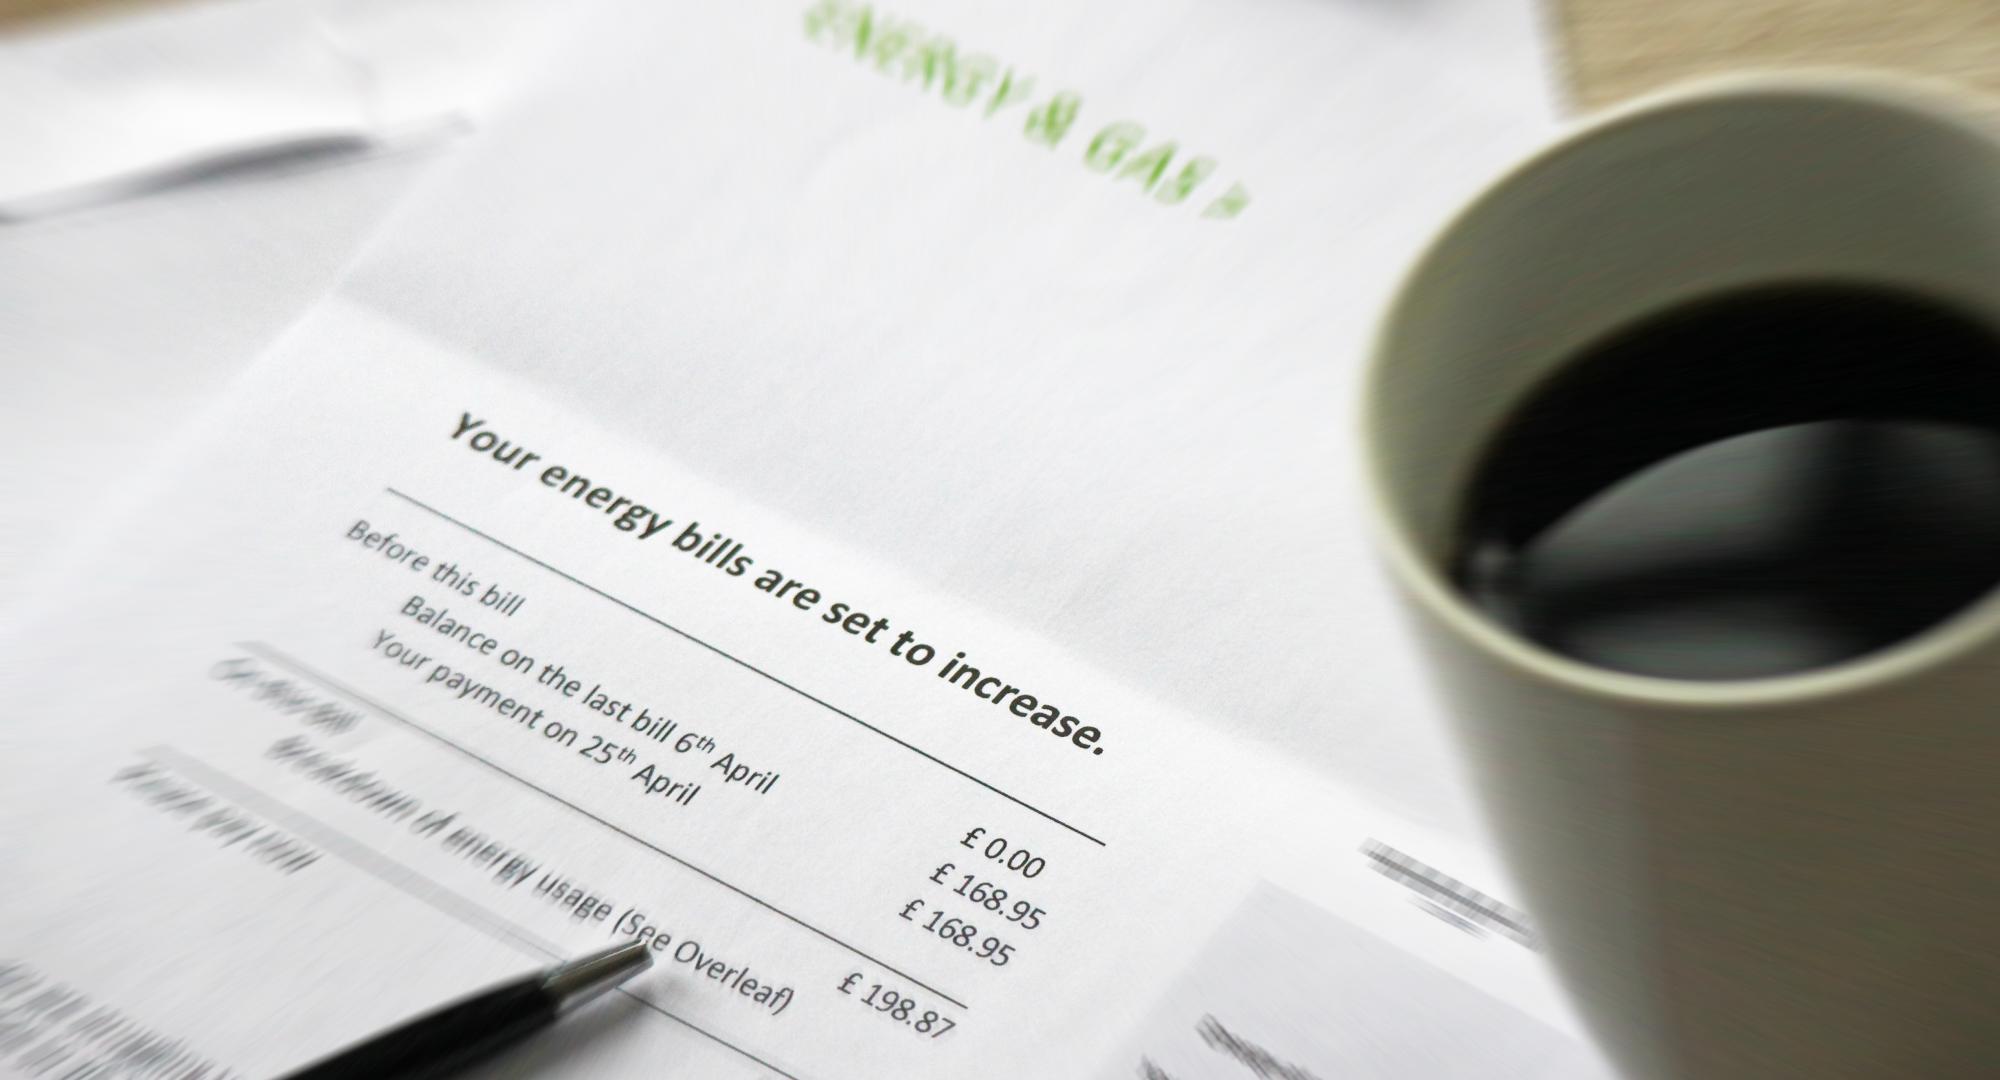 A letter outlining an increase in energy bills for a household